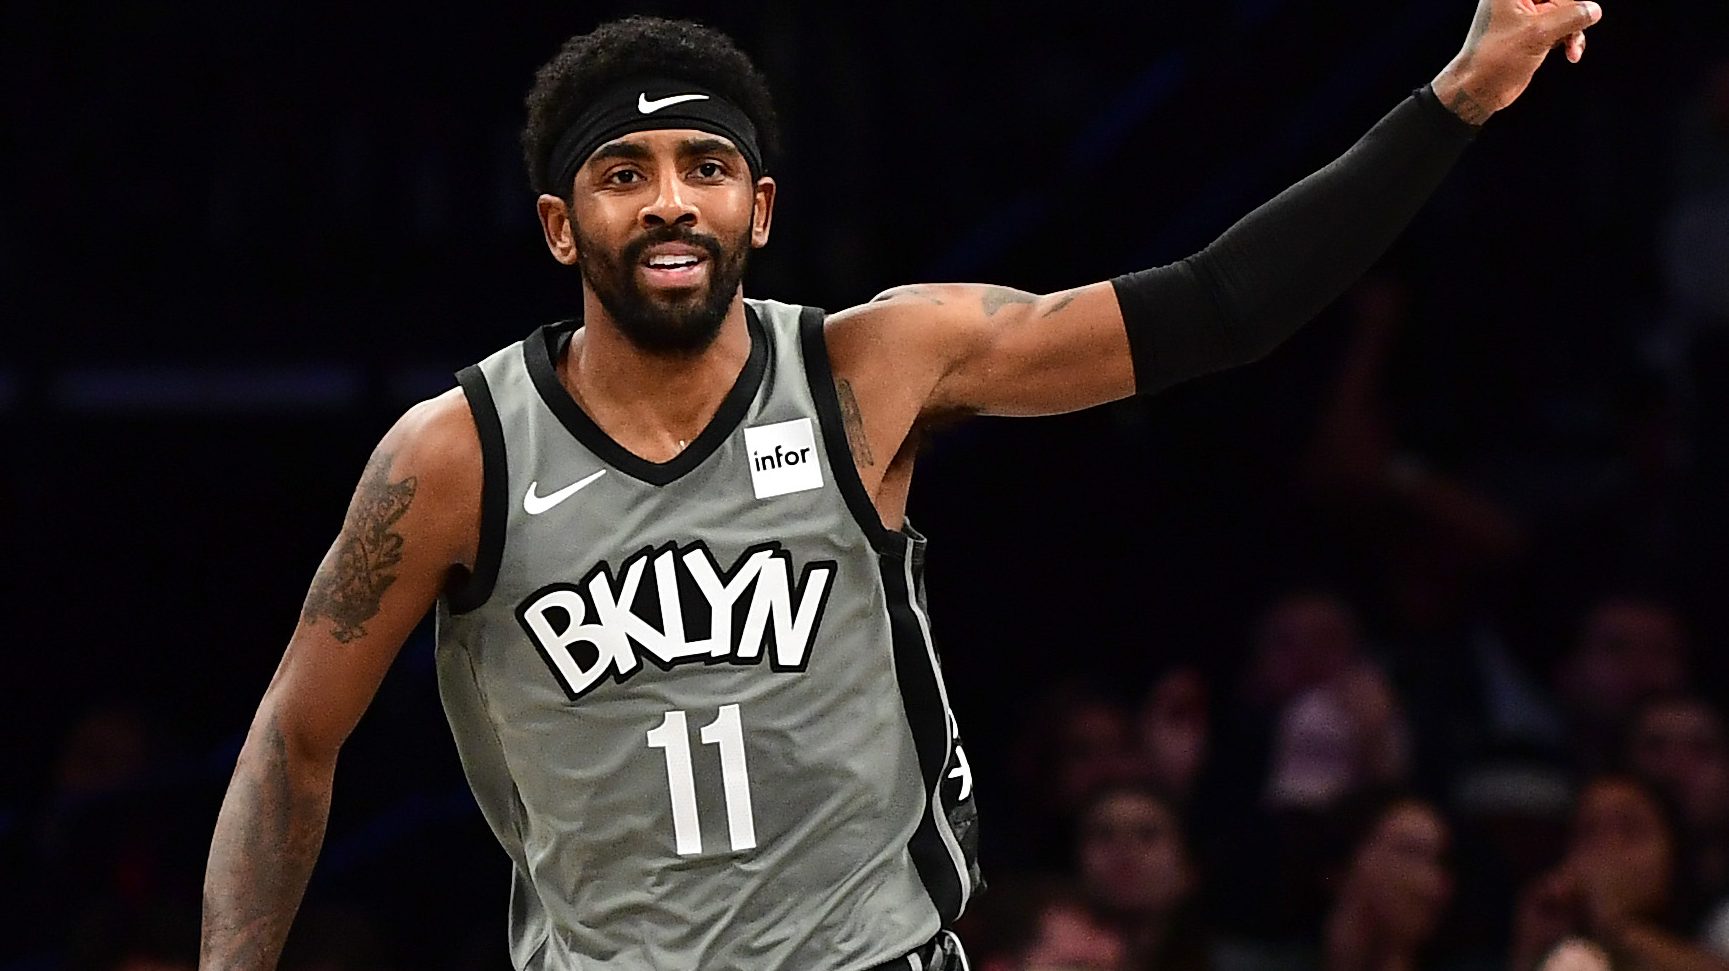 Rod Strickland Was One Of The Most Underrated PGs' To Ever Play Our Game,  Says Kyrie Irving - The Hype Magazine